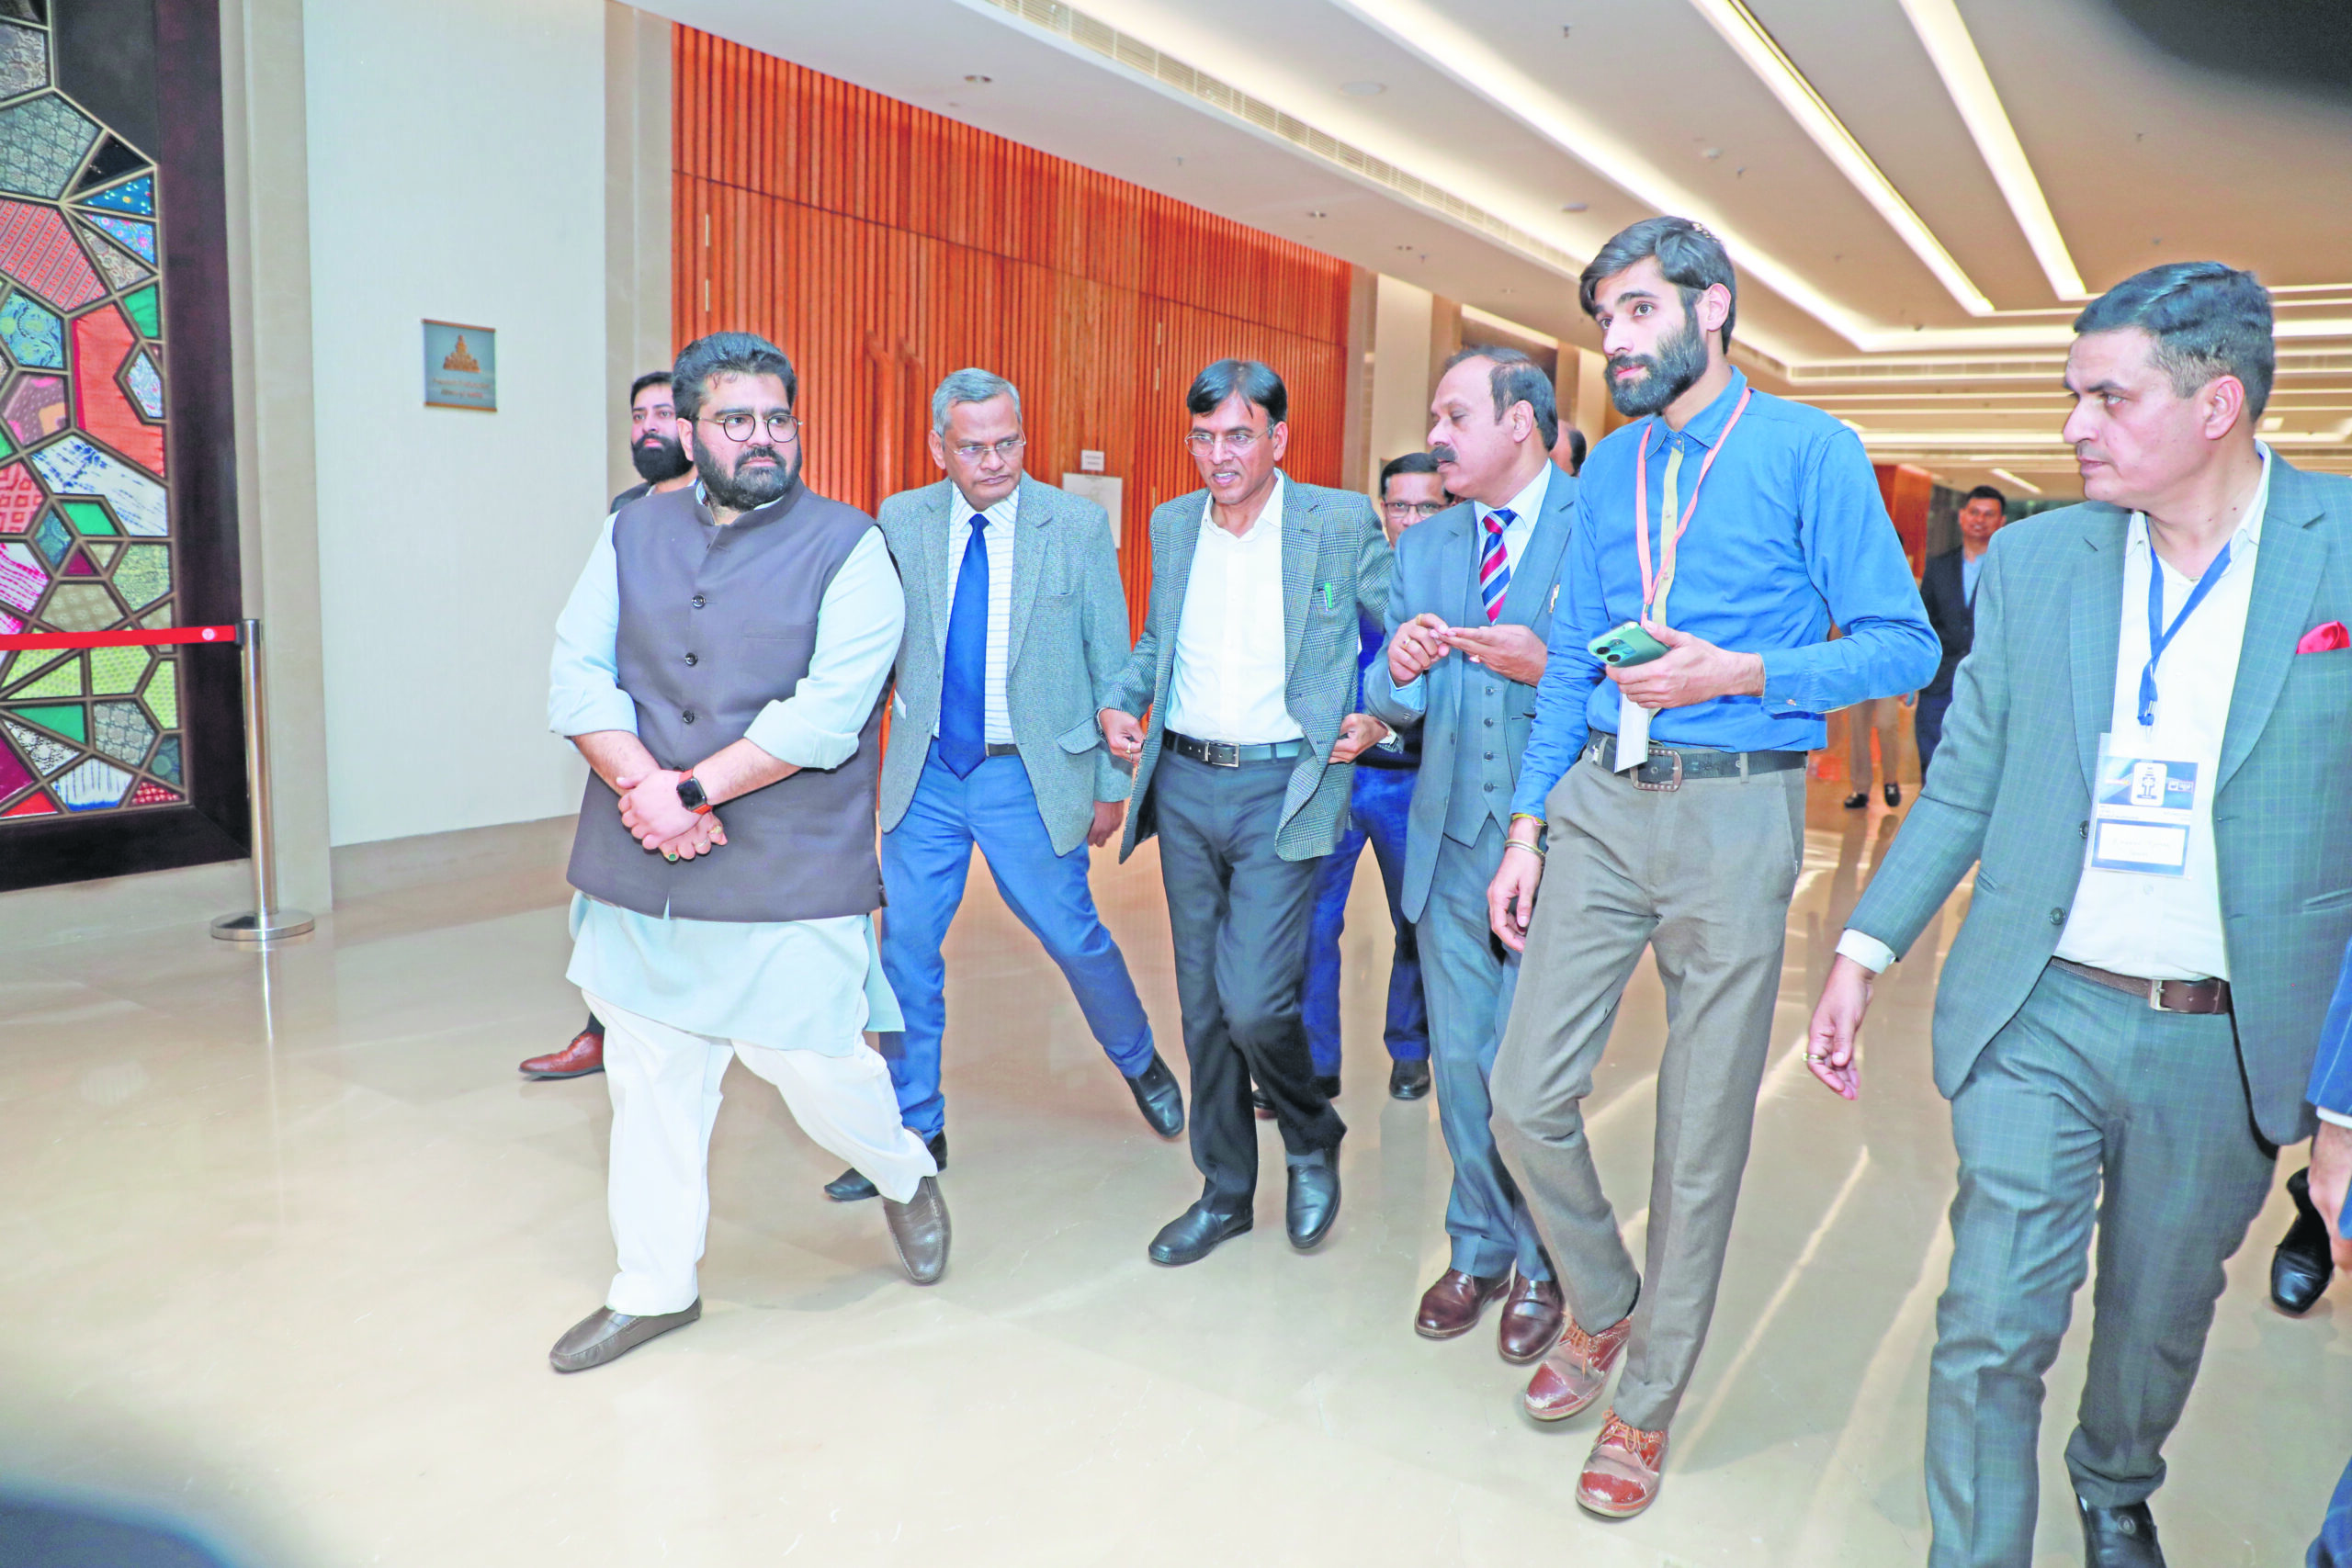 AIIMS Directors share vision for health care access and research